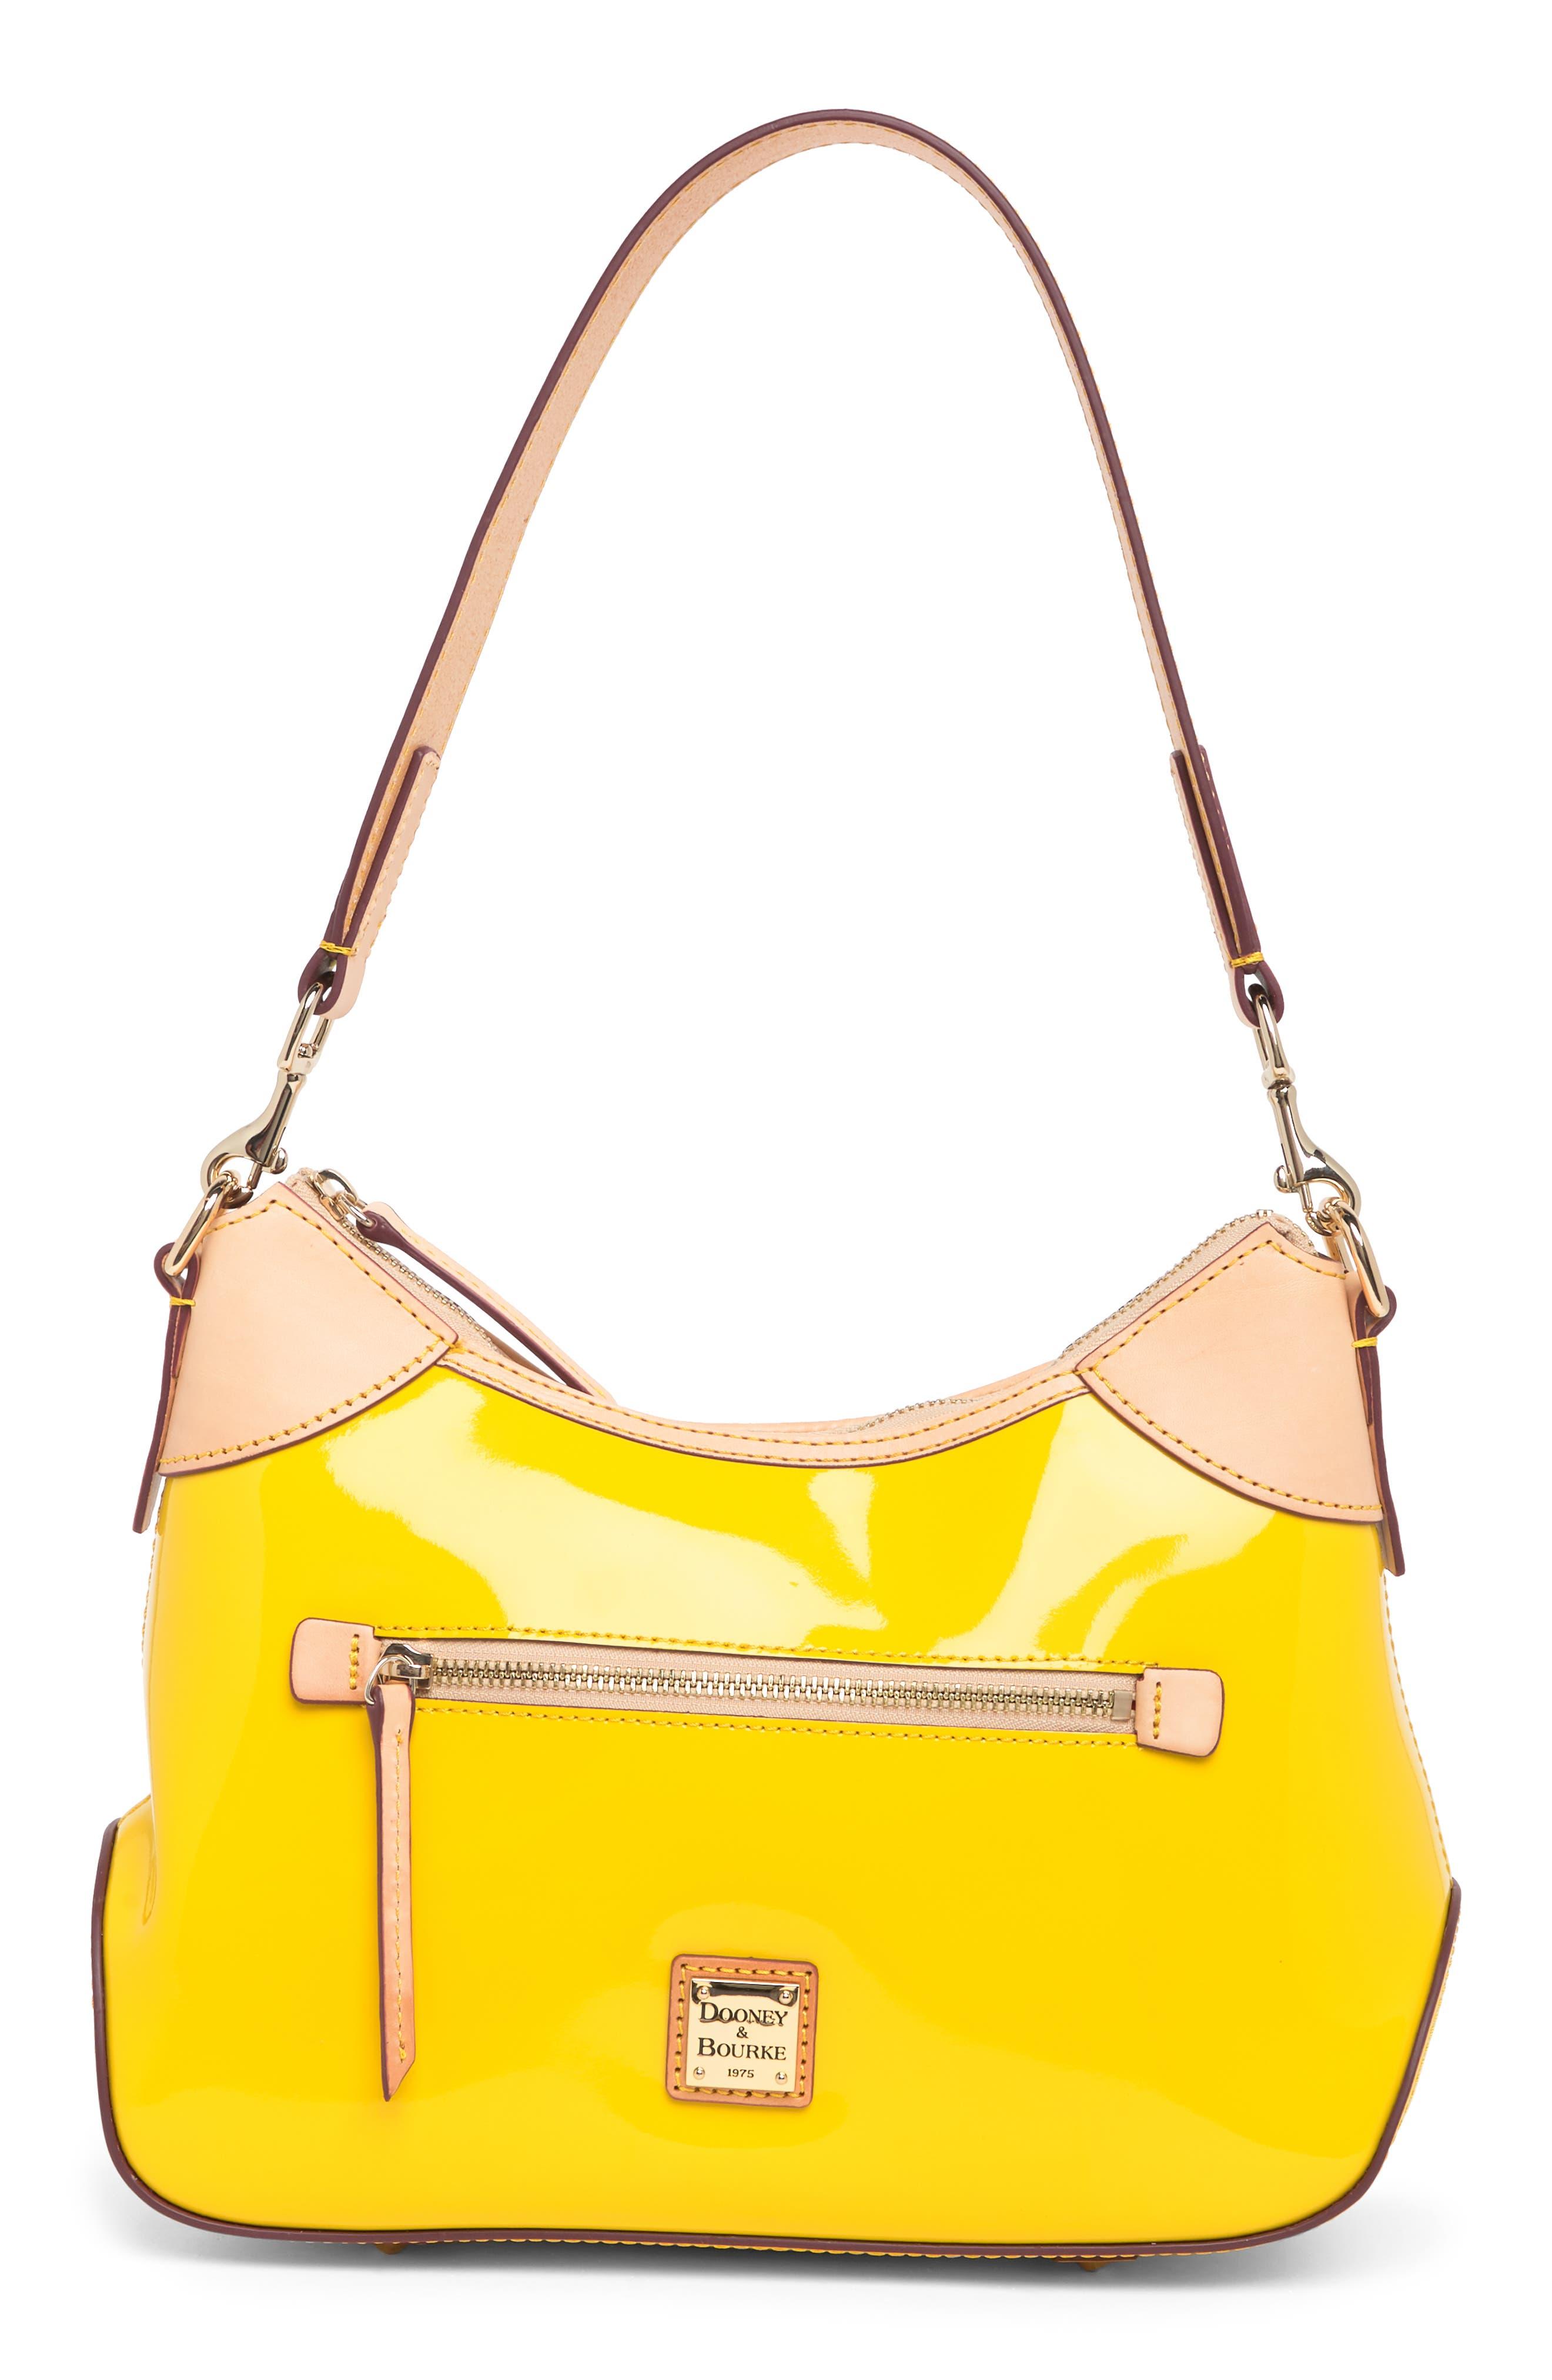 Dooney & Bourke Patent Leather Hobo Bag in Yellow | Lyst